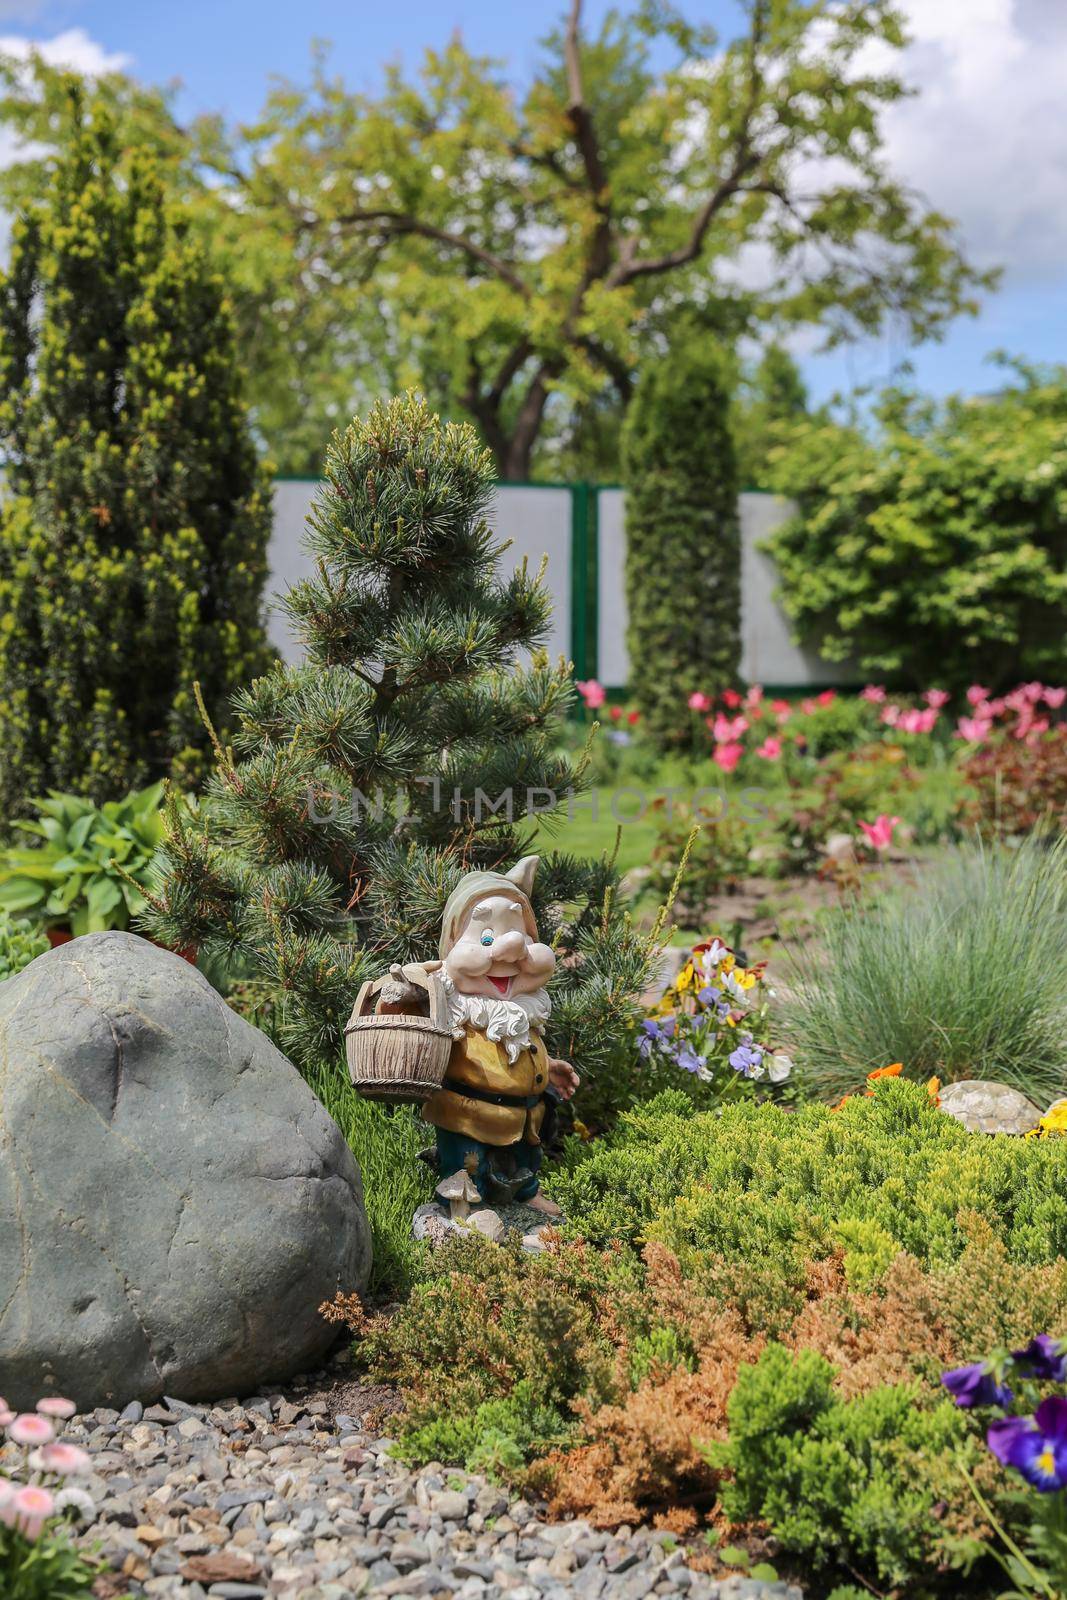 Funny garden gnome standing among nice flowers